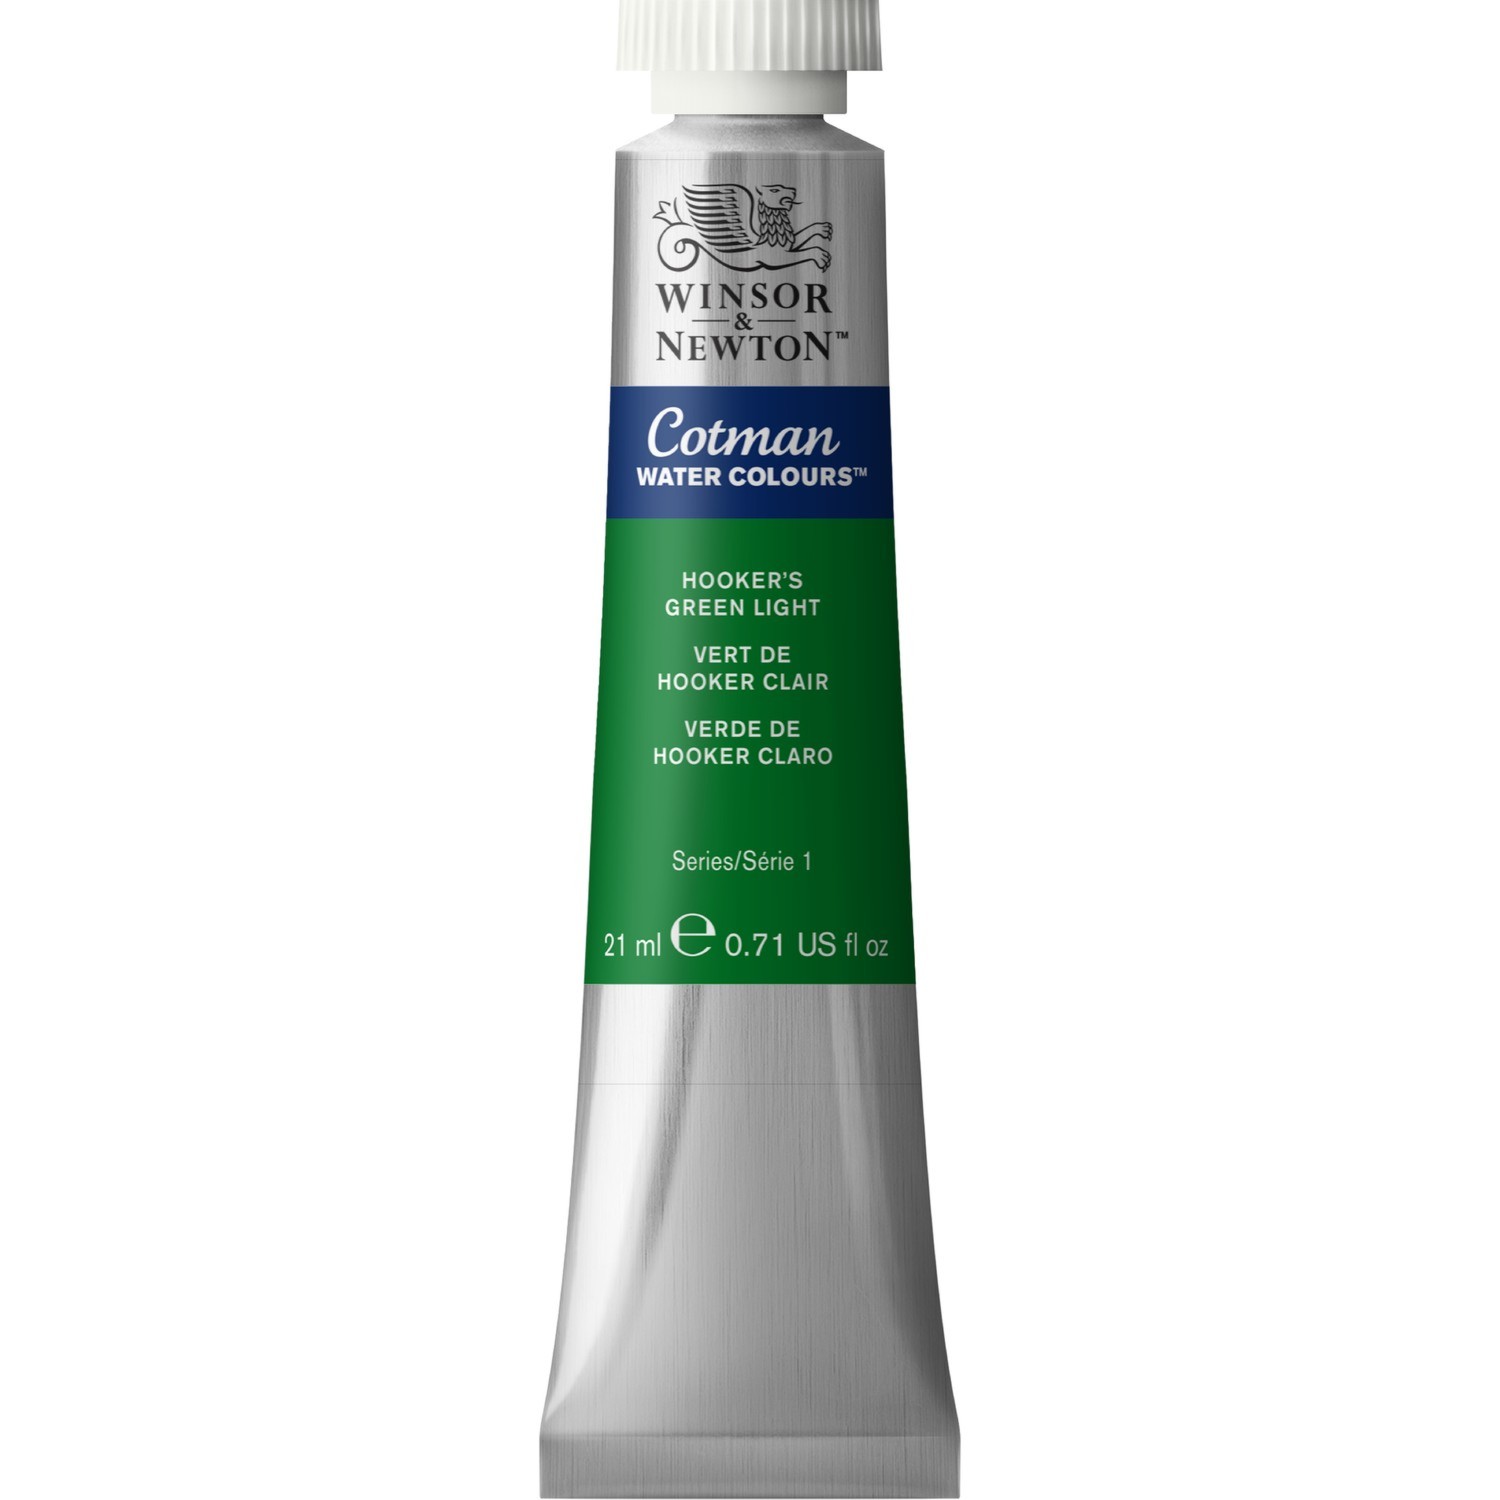 Winsor and Newton Cotman Watercolour Paint 21ml - Light Hookers Green Image 1